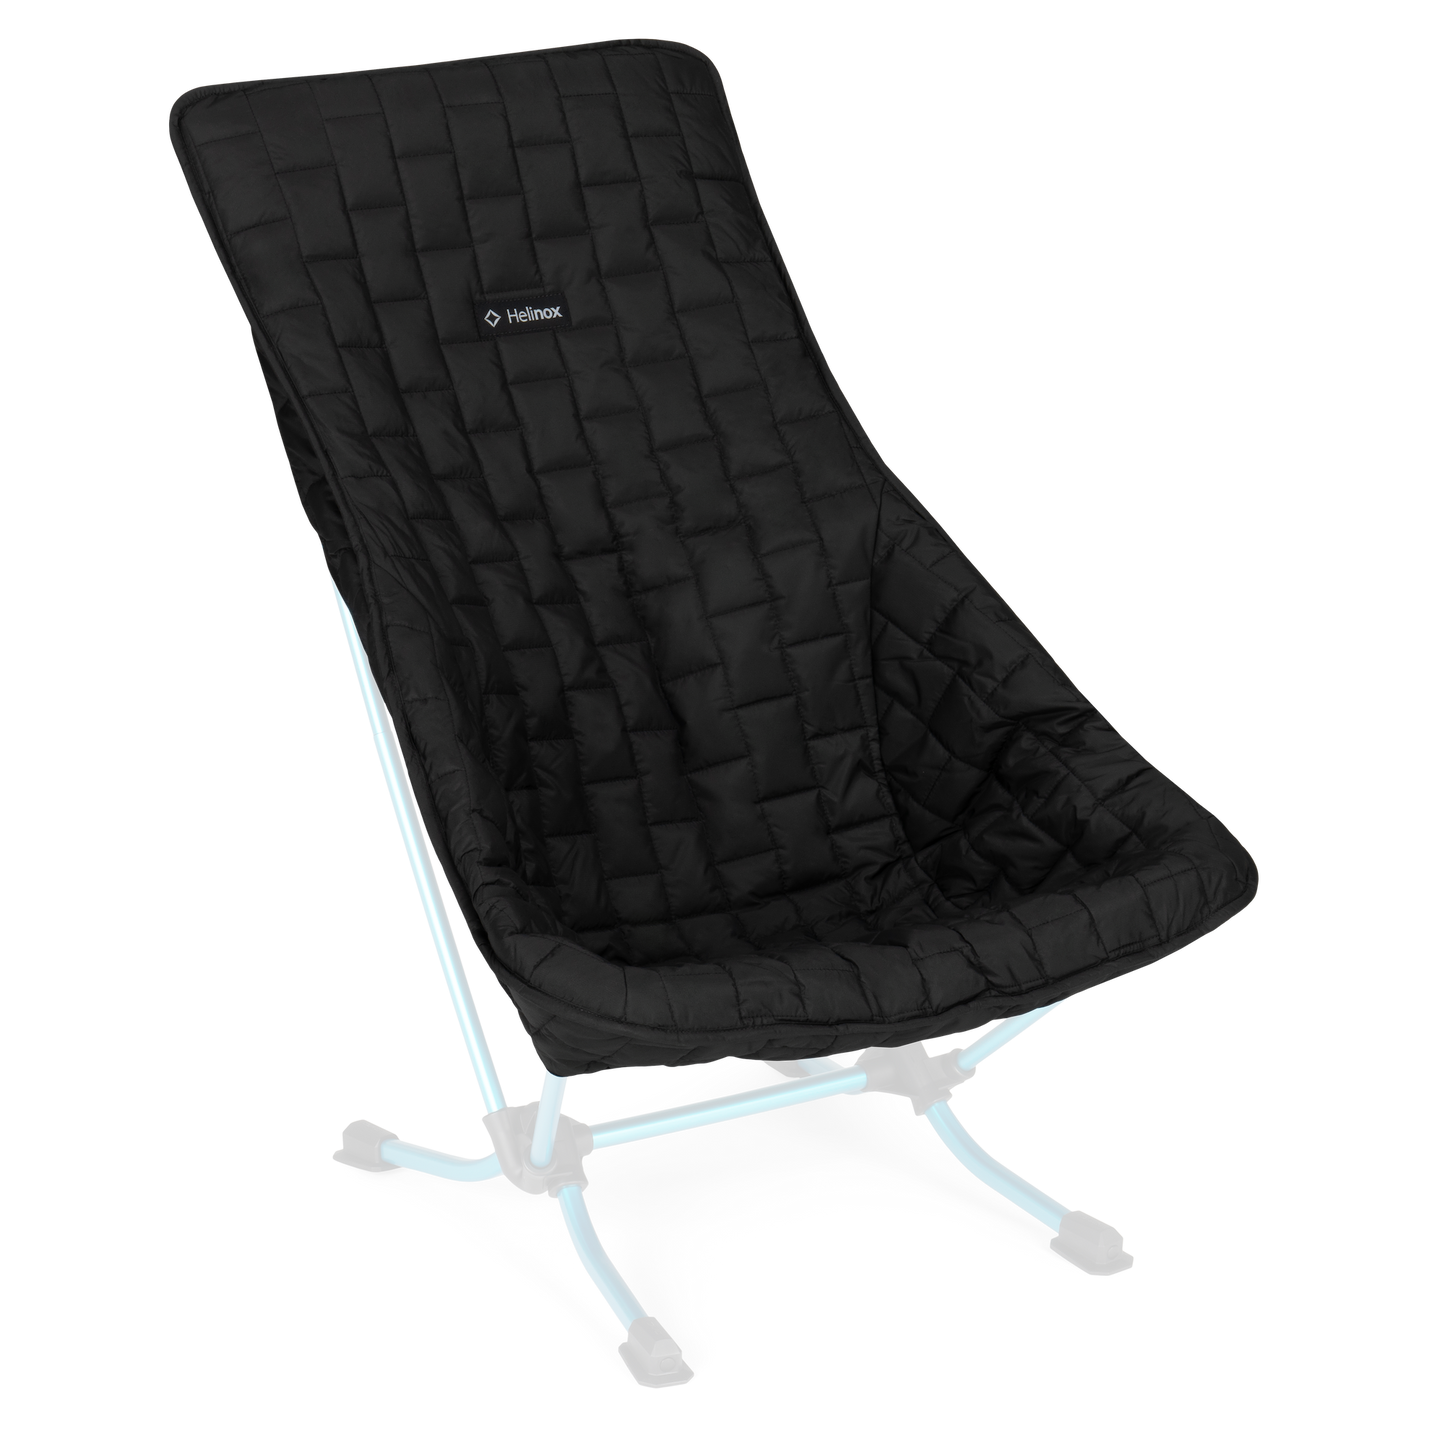 Seat Warmer for Sunset/Beach - Black/Coyote Tan